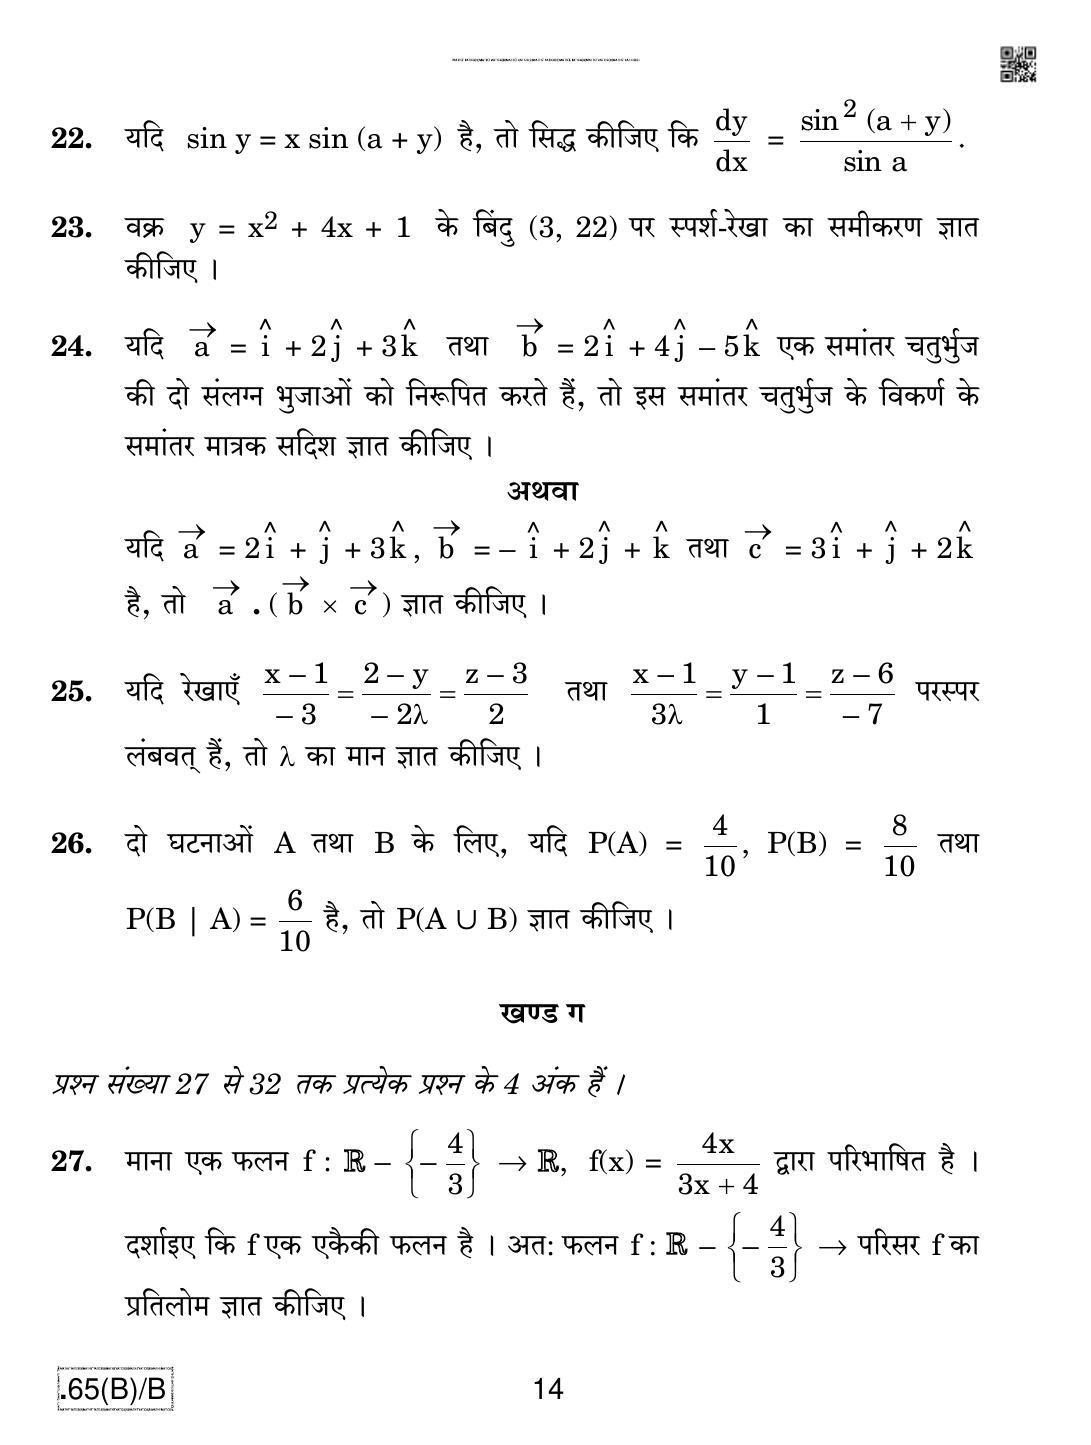 CBSE Class 12 65(B)-C - Maths For Blind Candidates 2020 Compartment Question Paper - Page 14